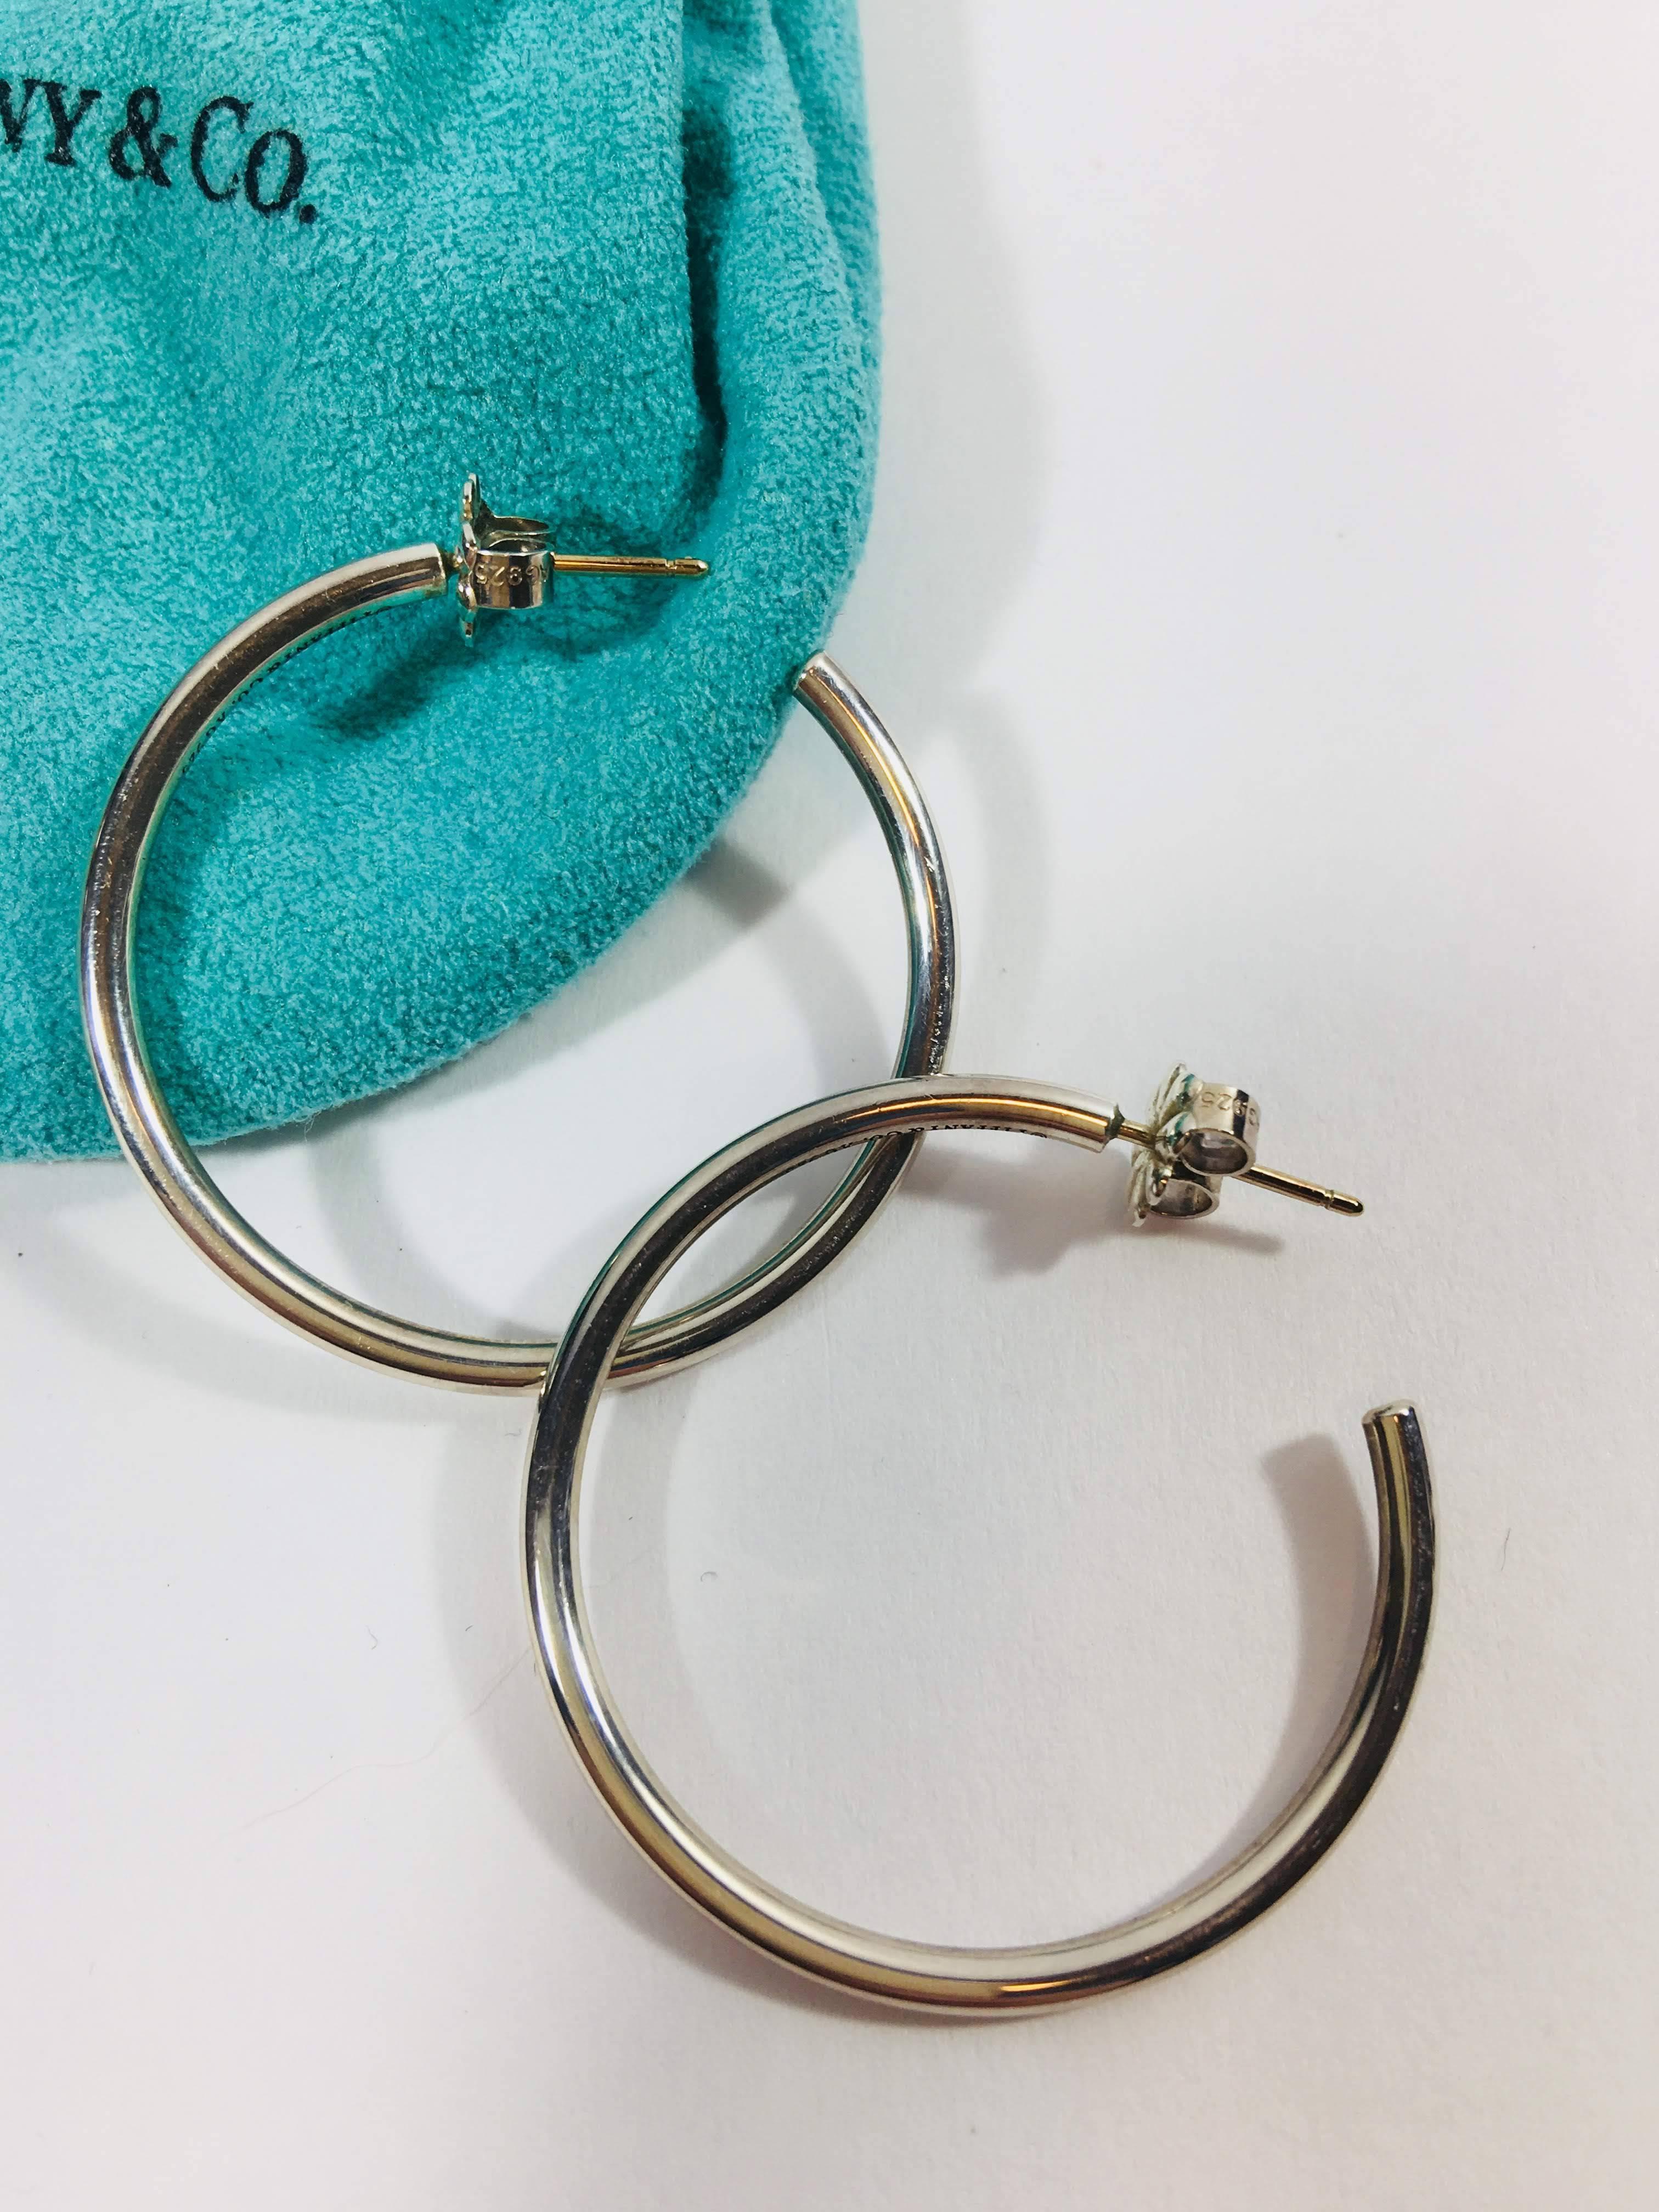 Tiffany & Co. Sterling Silver Small Hoop Earrings with Posts and Friction Backs. Comes with Original Bag and Cleaning Manual. 